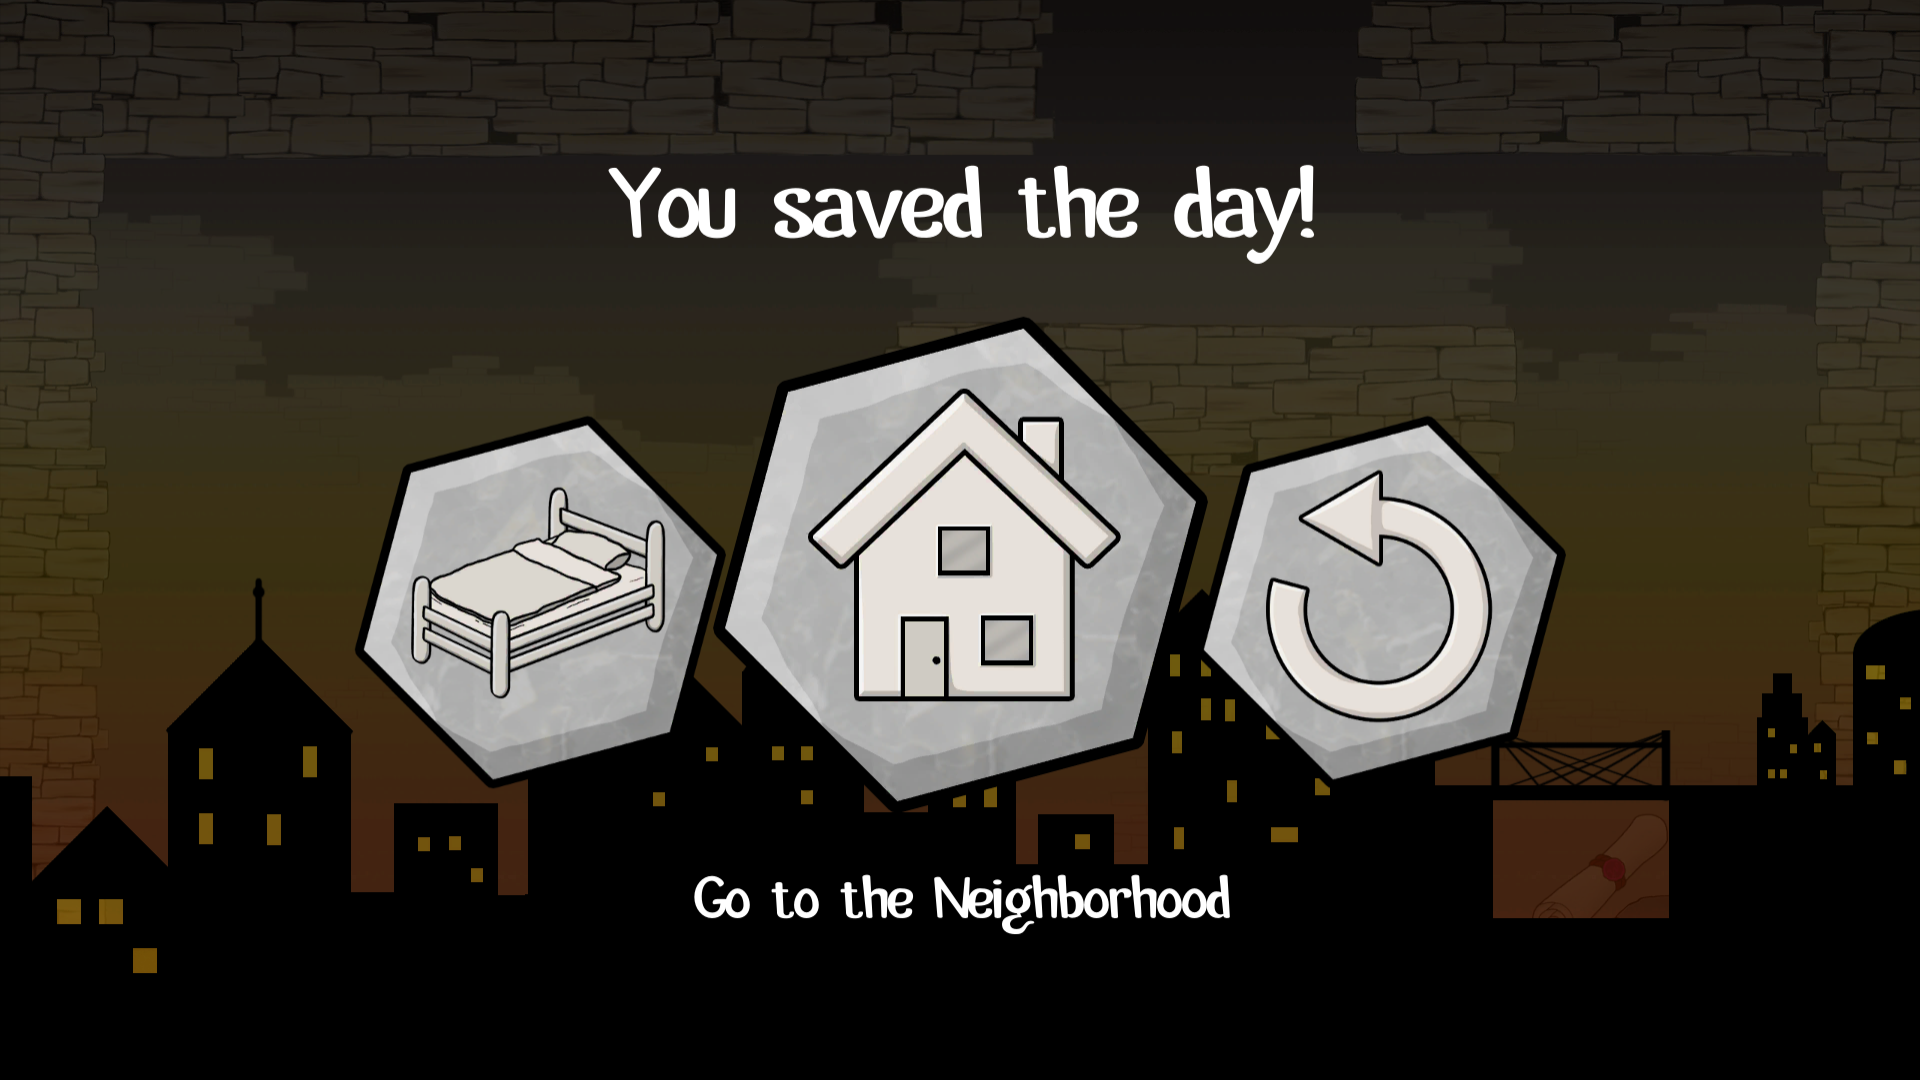 Screenshot of the game that shows the success screen after a level has been completed. In the background the level can be seen, overlayed by the silhouette of a city with illuminated windows. In the foreground The message: 'You saved the day!' Below are three buttons: 'Go to the Bedroom' (main menu), 'Go to the Neighborhood' (level selection) and 'Dream Again' (replay the level), while the second one is currently selected.